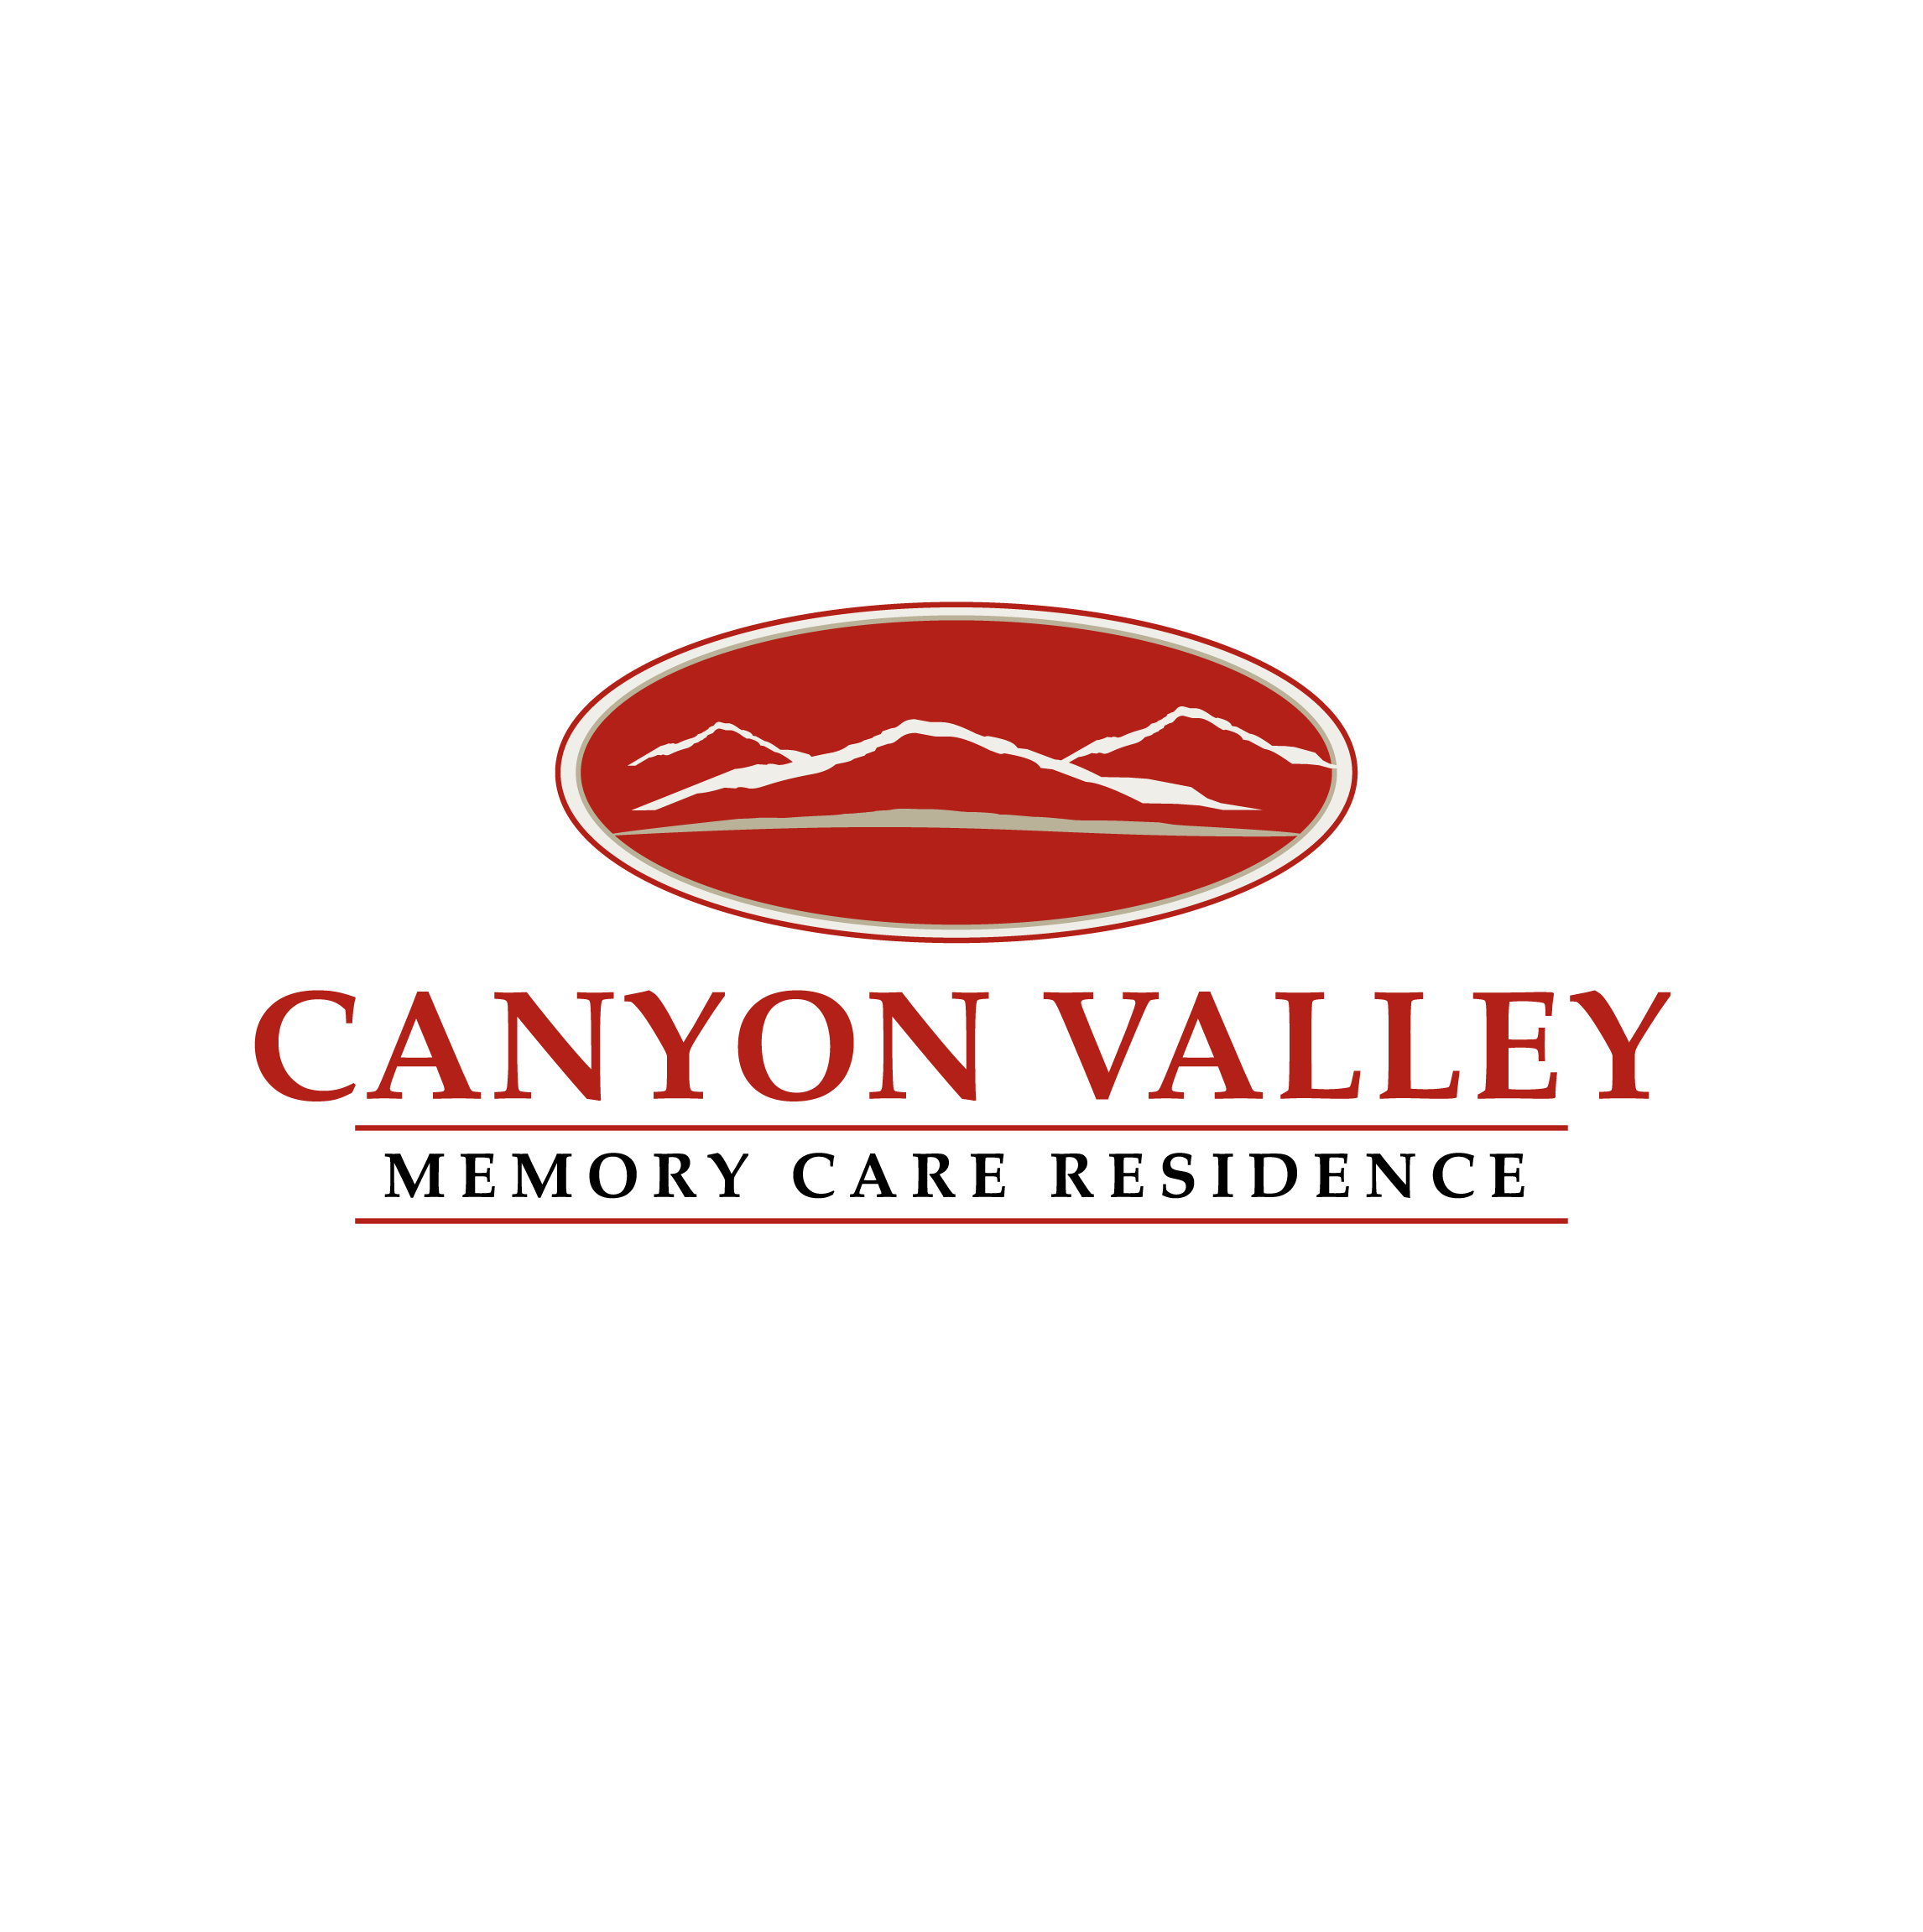 03. Canyon Valley Memory Care (Regional)